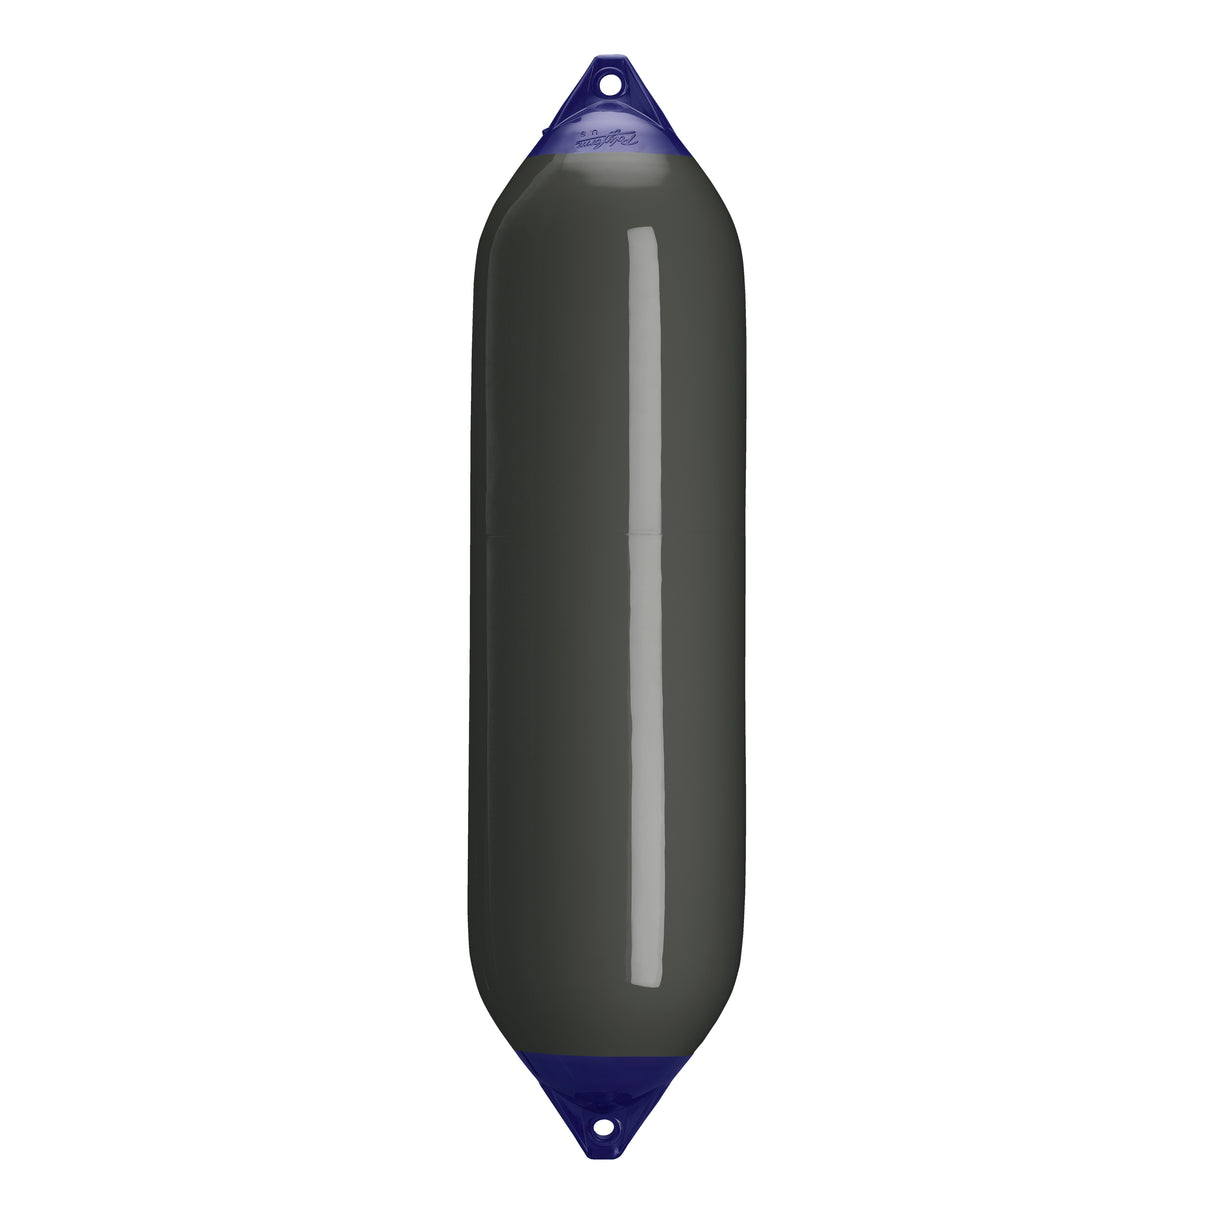 Graphite boat fender with Navy-Top, Polyform F-8 